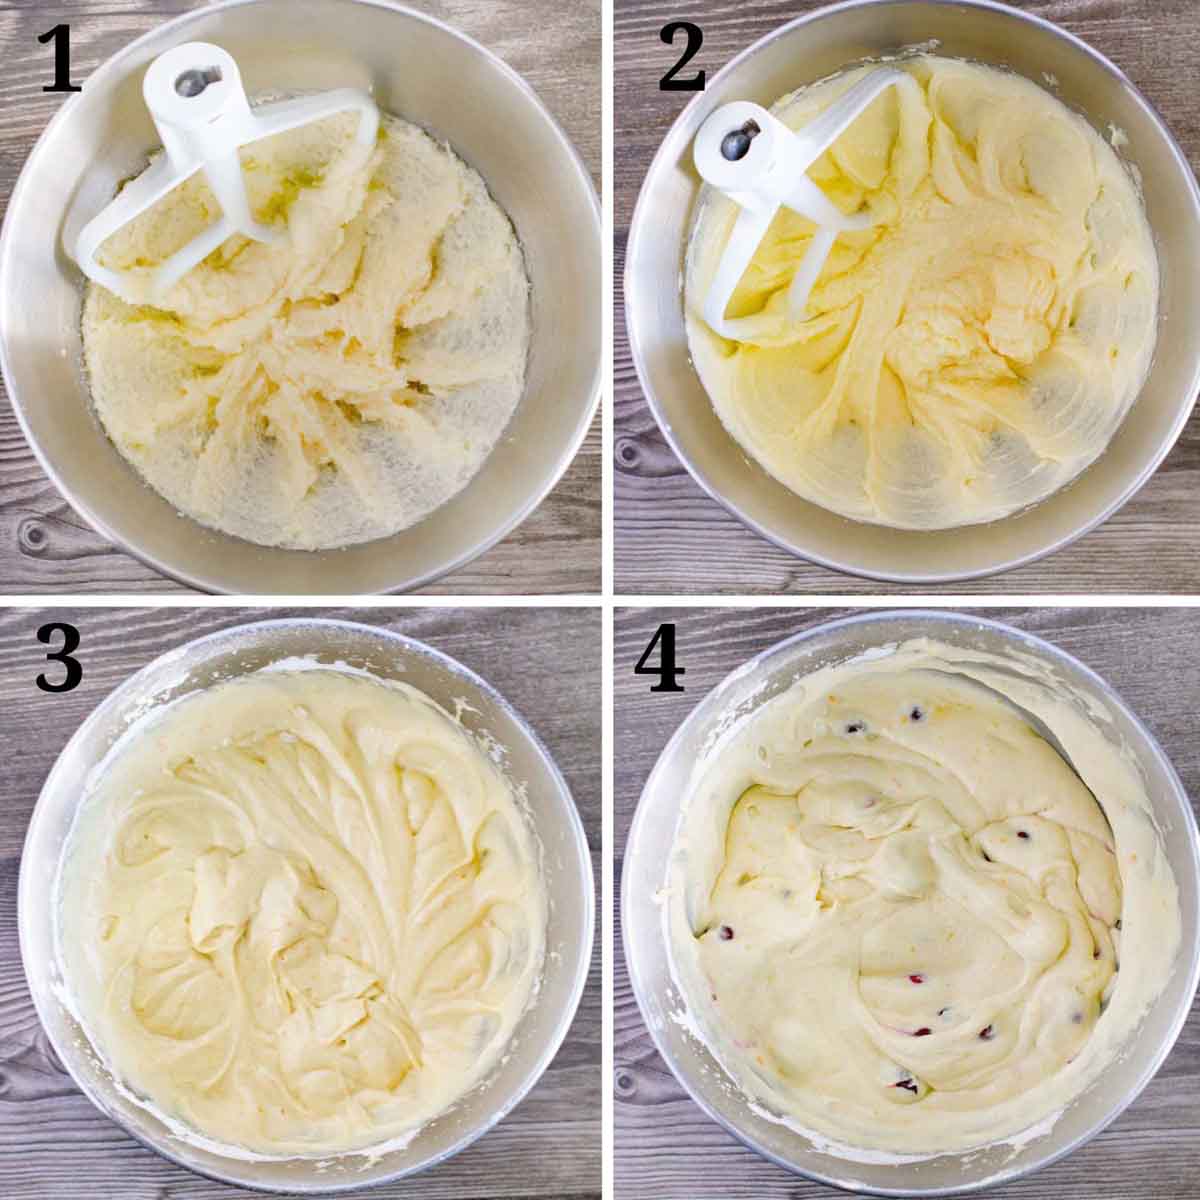 Collage showing how to make batter.